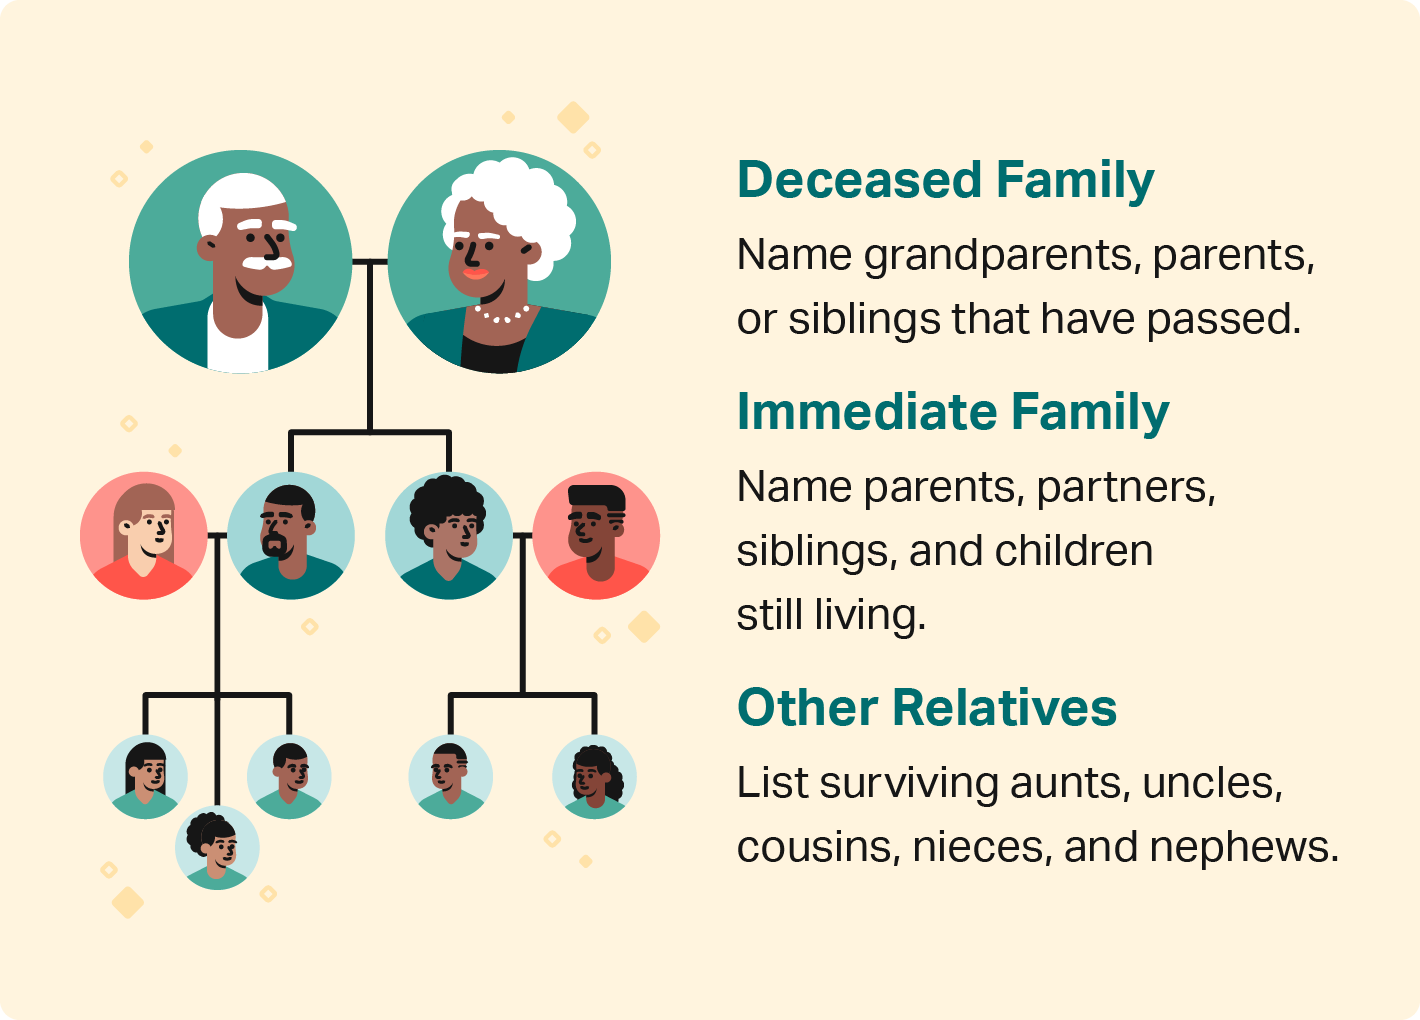 A family tree illustration explains how to include different family members in the obituary.